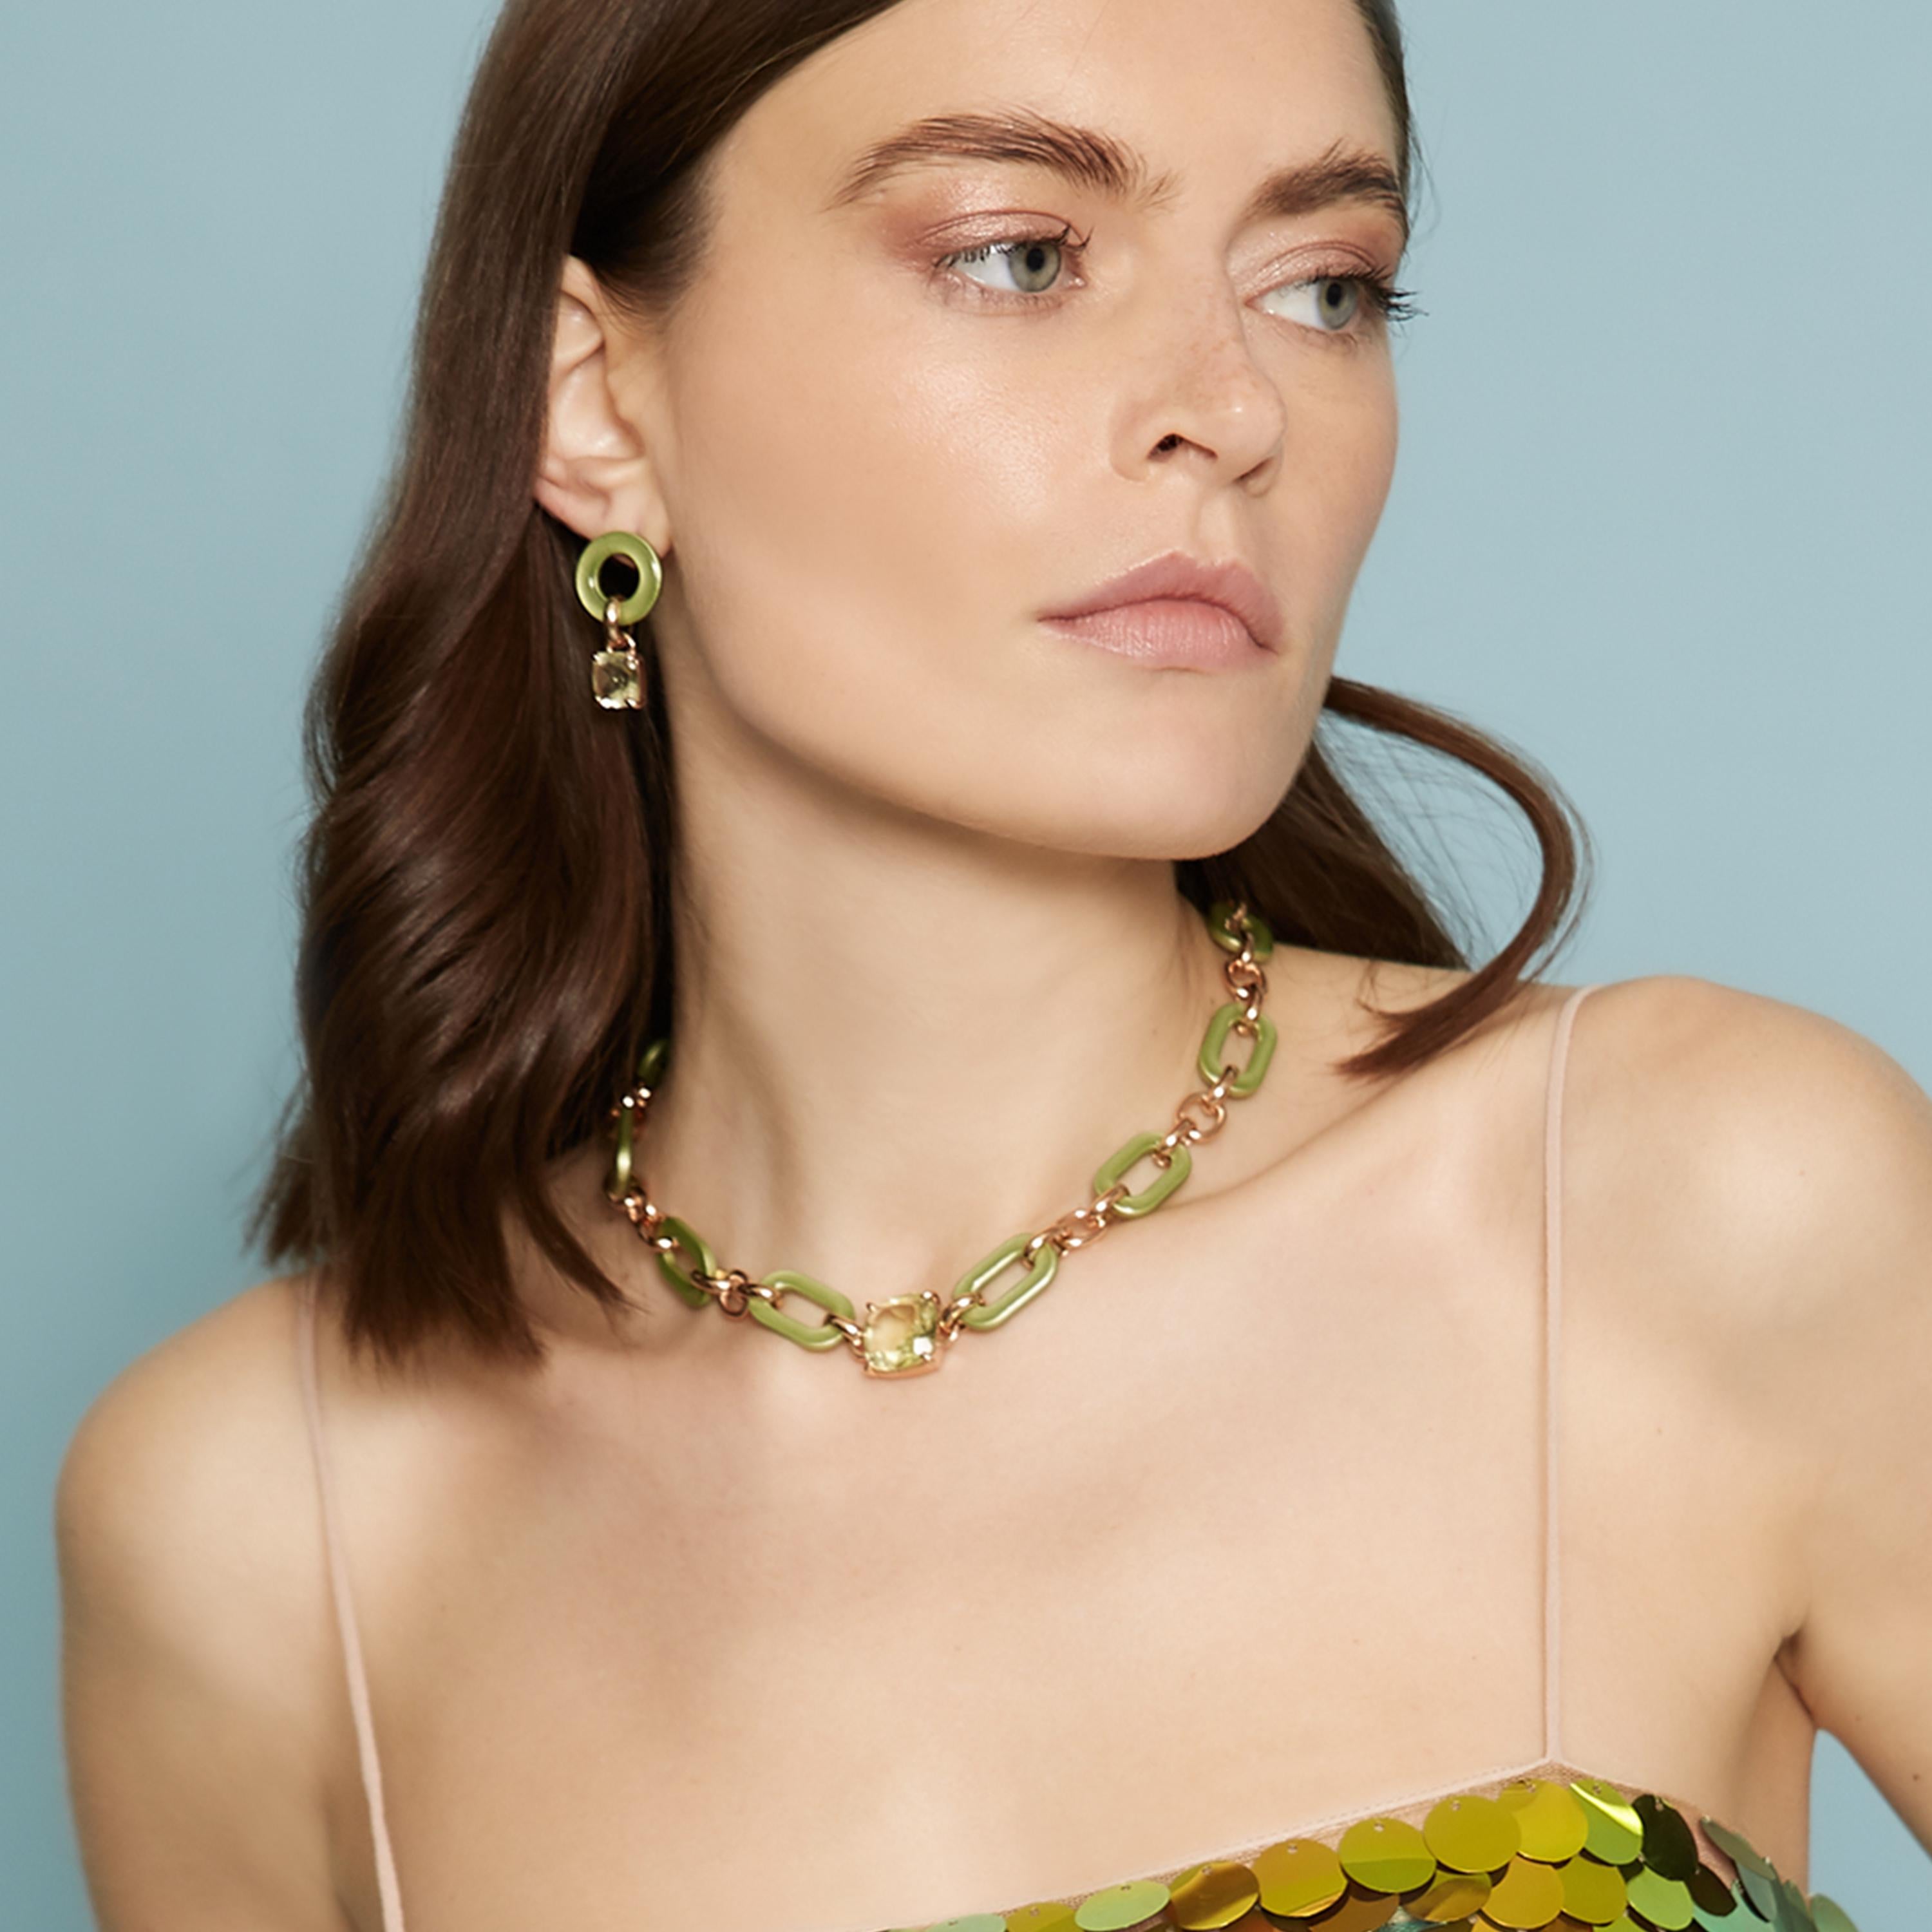 ROSSOPREZIOSO chain choker is hand made in Italy, in hand-made lacquered and enameled olive wood, 24-karat gold plated anti-allergic metal, embellished with hydrothermal quartz.
The color of the wood is a brilliant orange and the gem is a deep dark